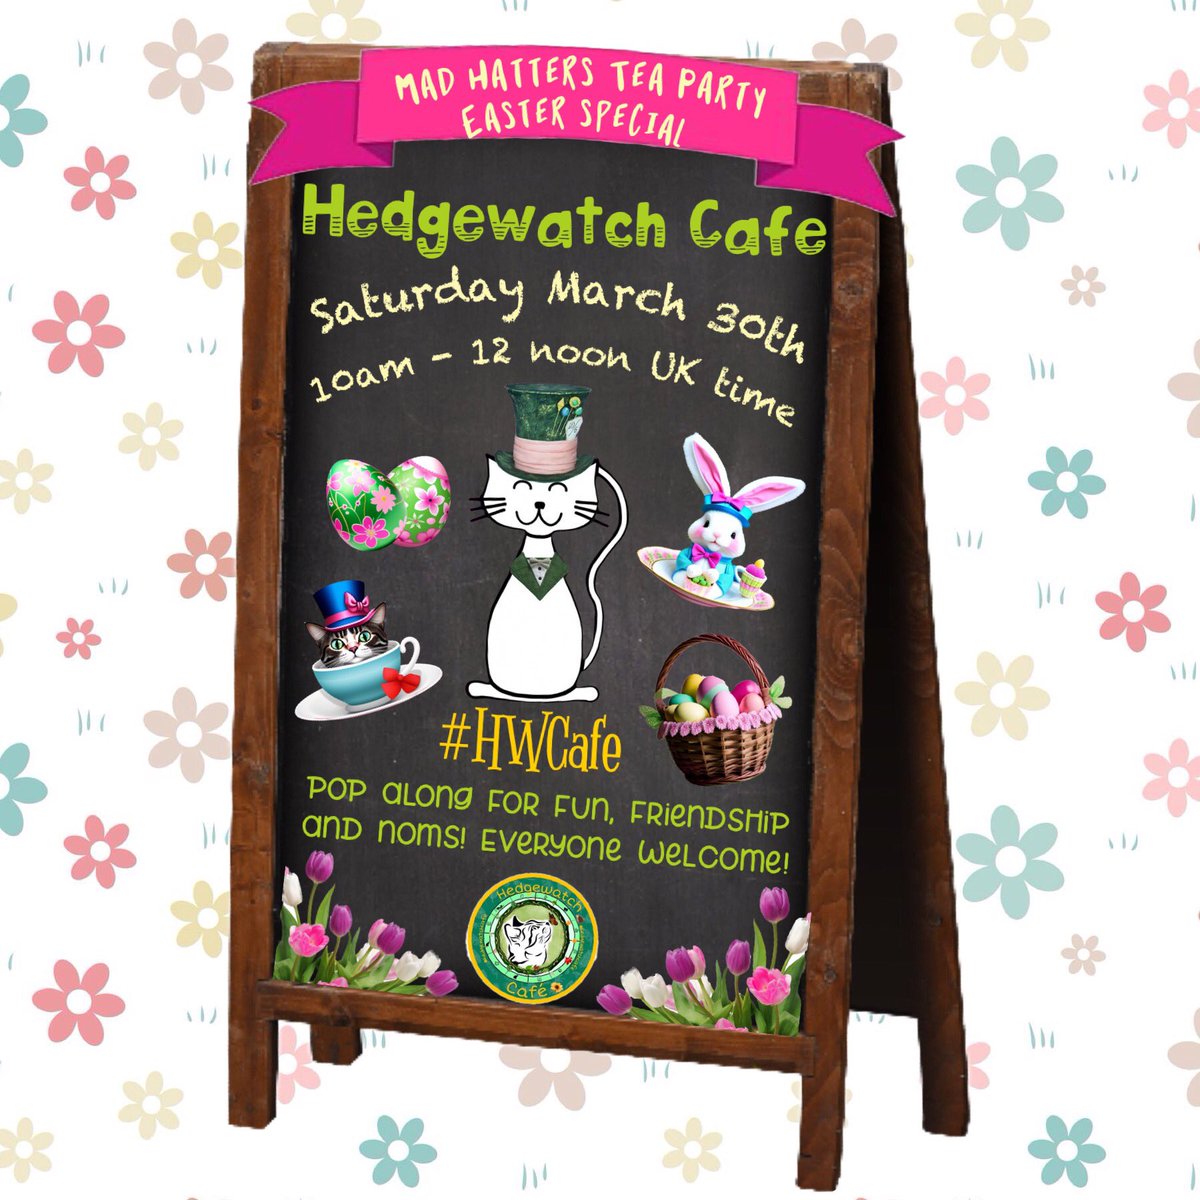 Tomorrow I will be working as Maître D’ at the #HWCafe from 10am. I hope to see you there💖 Before then, I have been trying out the photo booth. It’s so much fun. If you are posting your Easter Bonnet Parade photos, please remember the hashtag #HWCafeEBP😽🐾